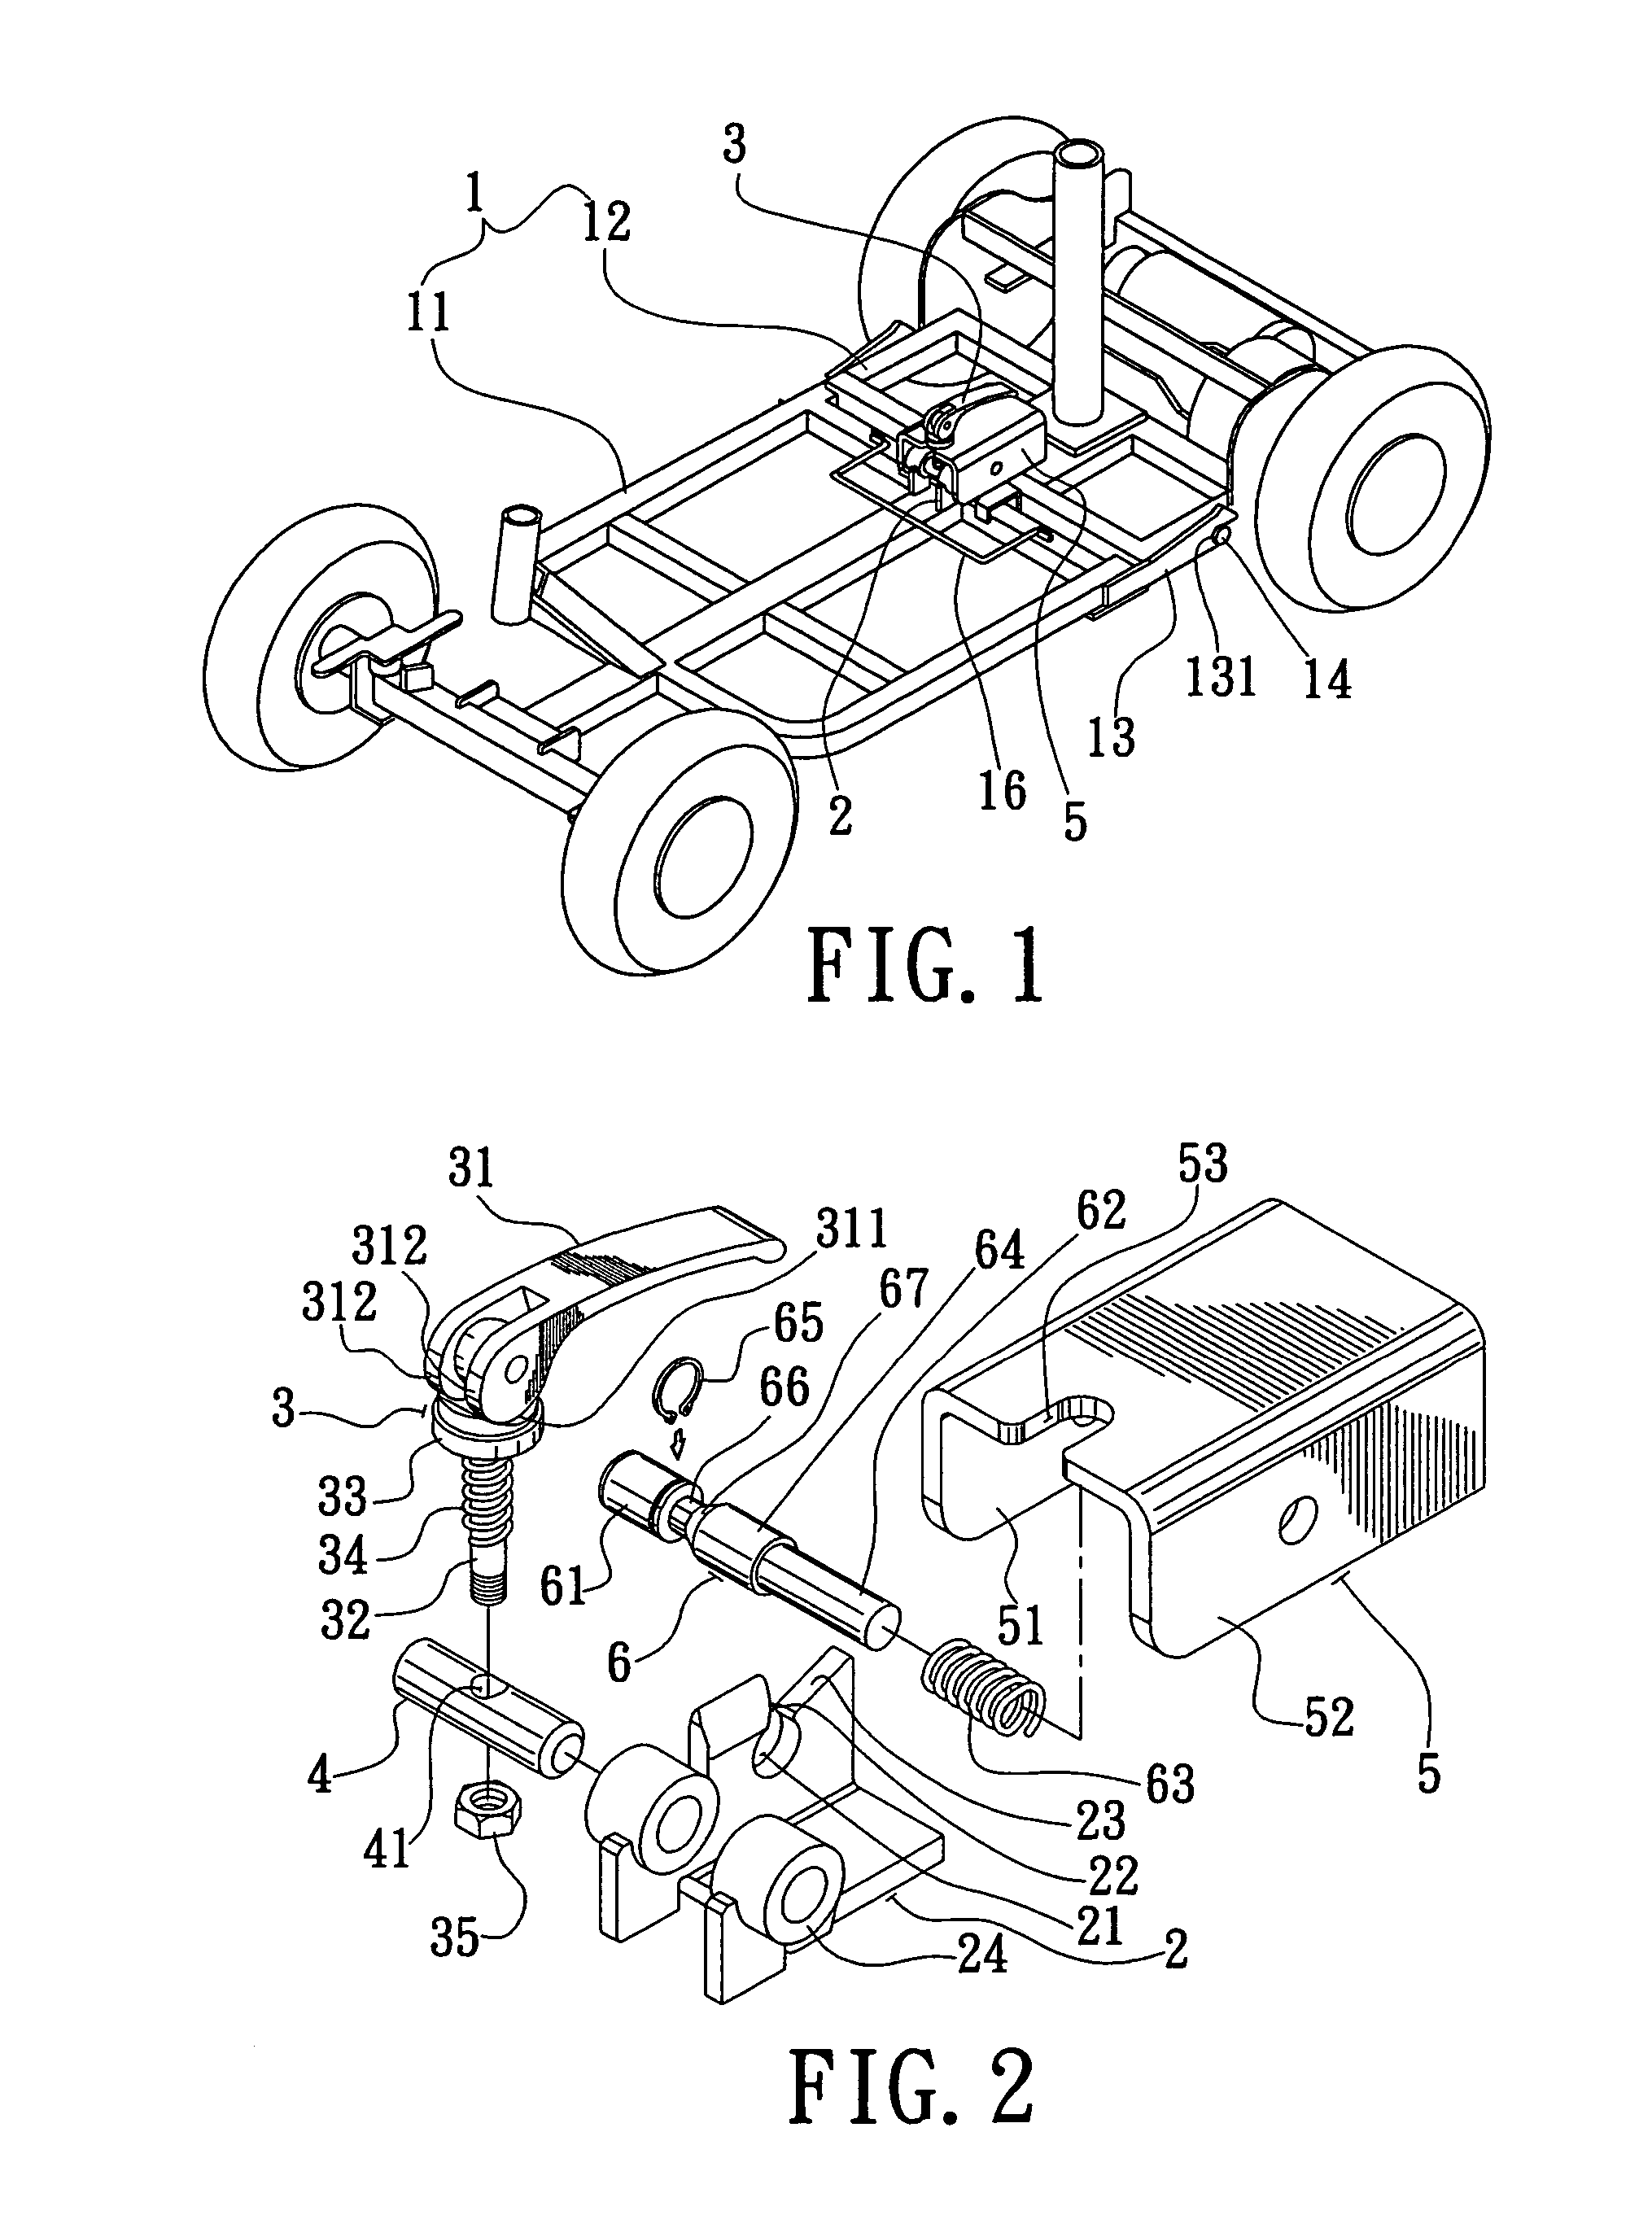 Structure of a frame of an electric cart for a person to ride on